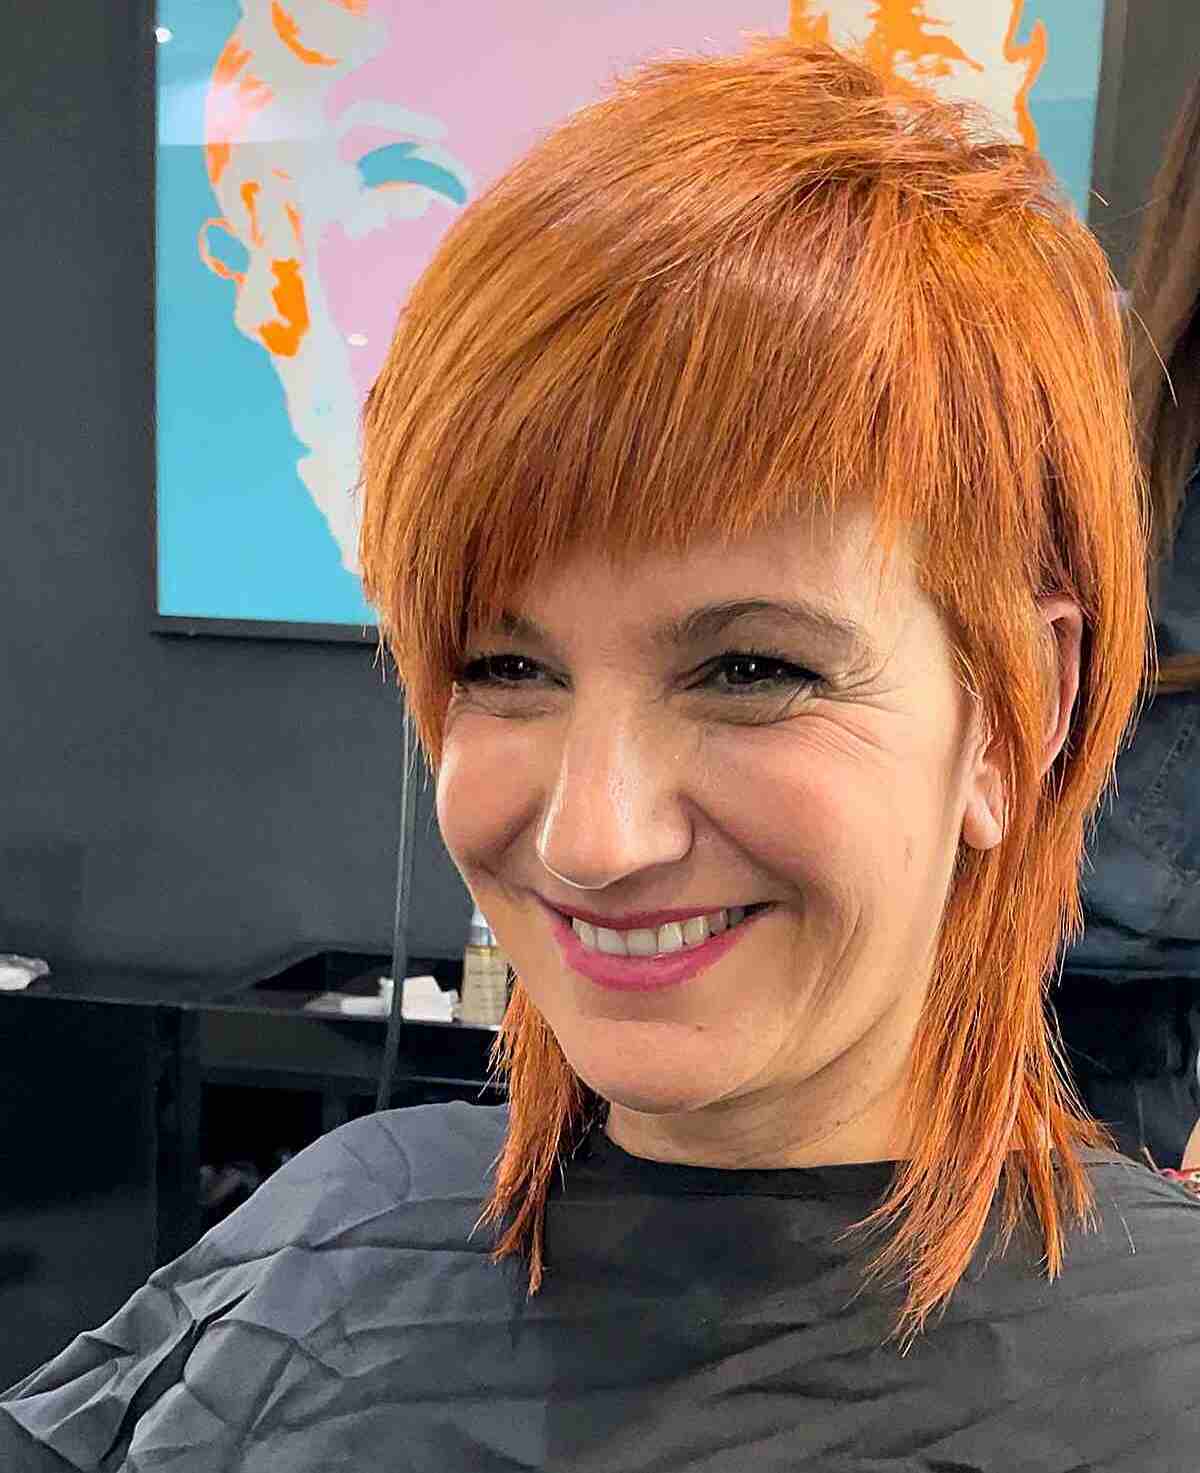 Asymmetric Bangs on a Mullet for 50-Year-Olds